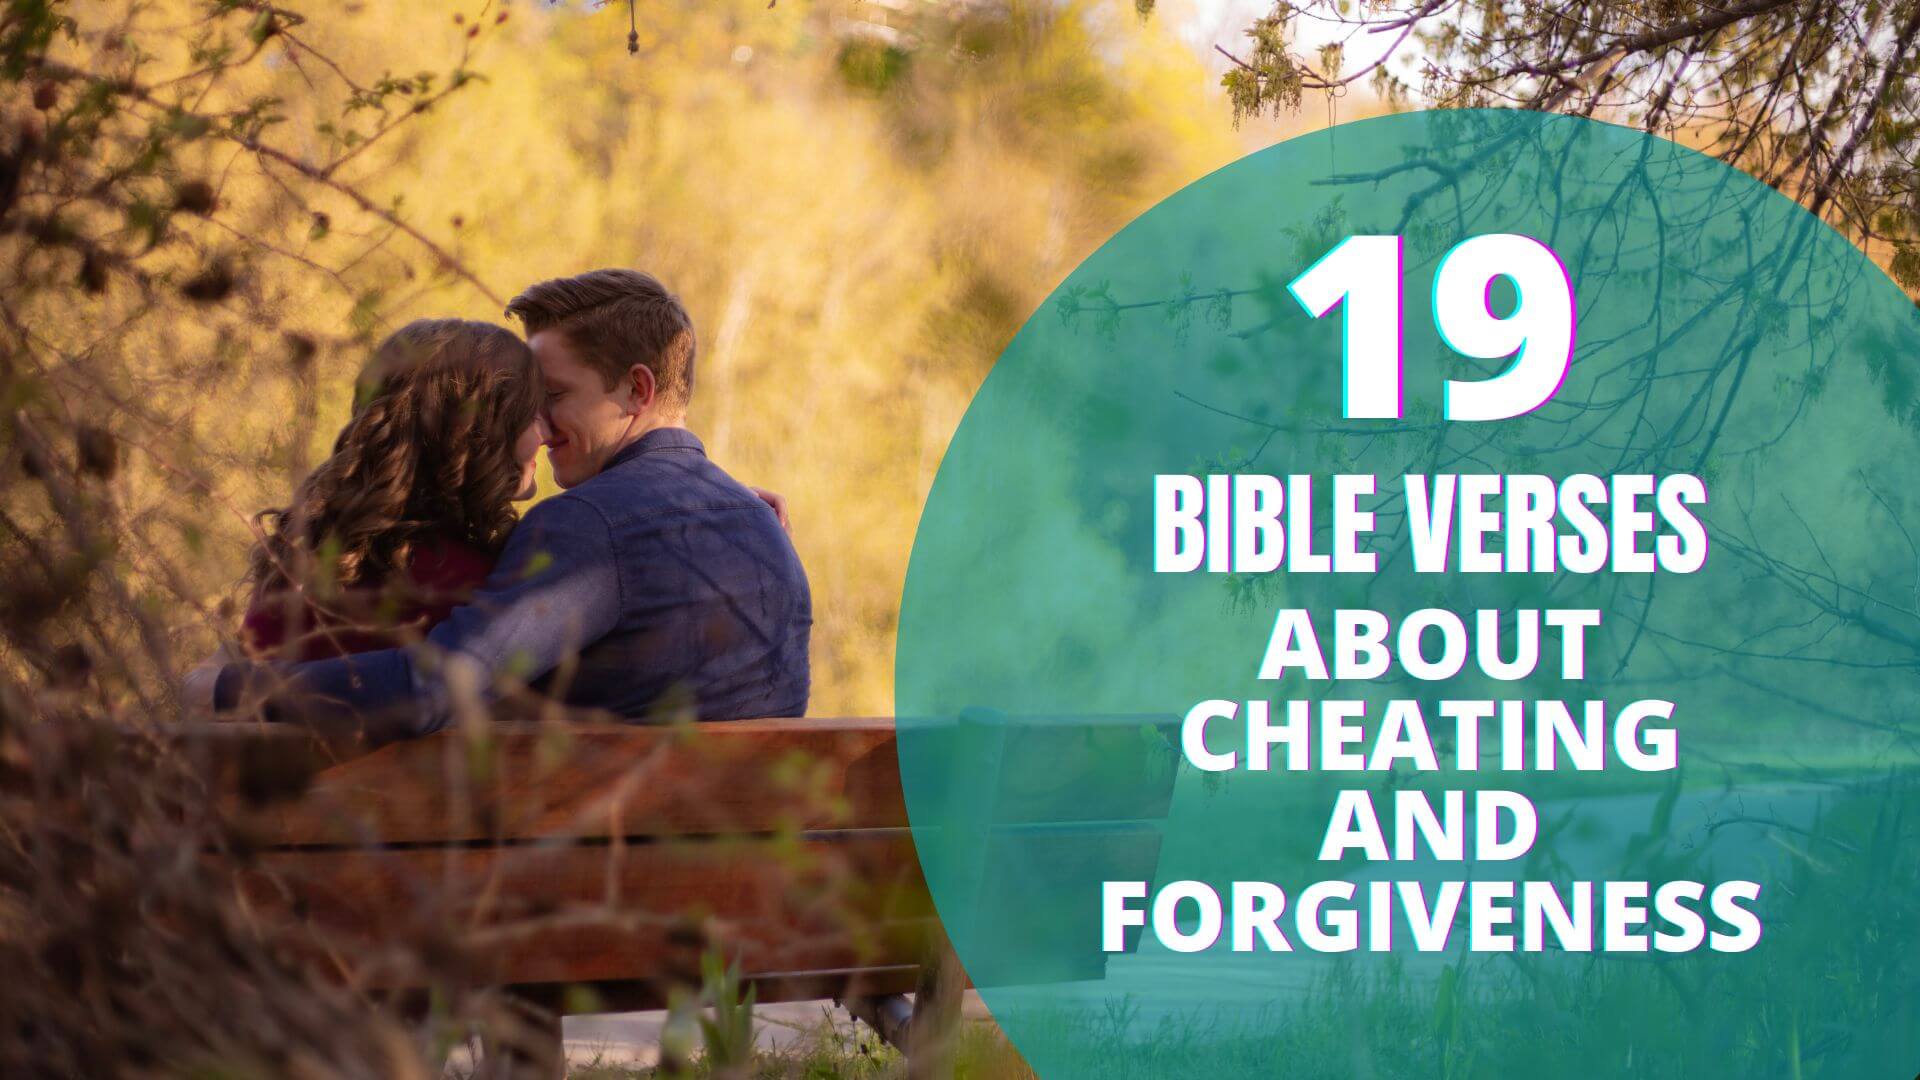 Bible Verses About Cheating And Forgiveness